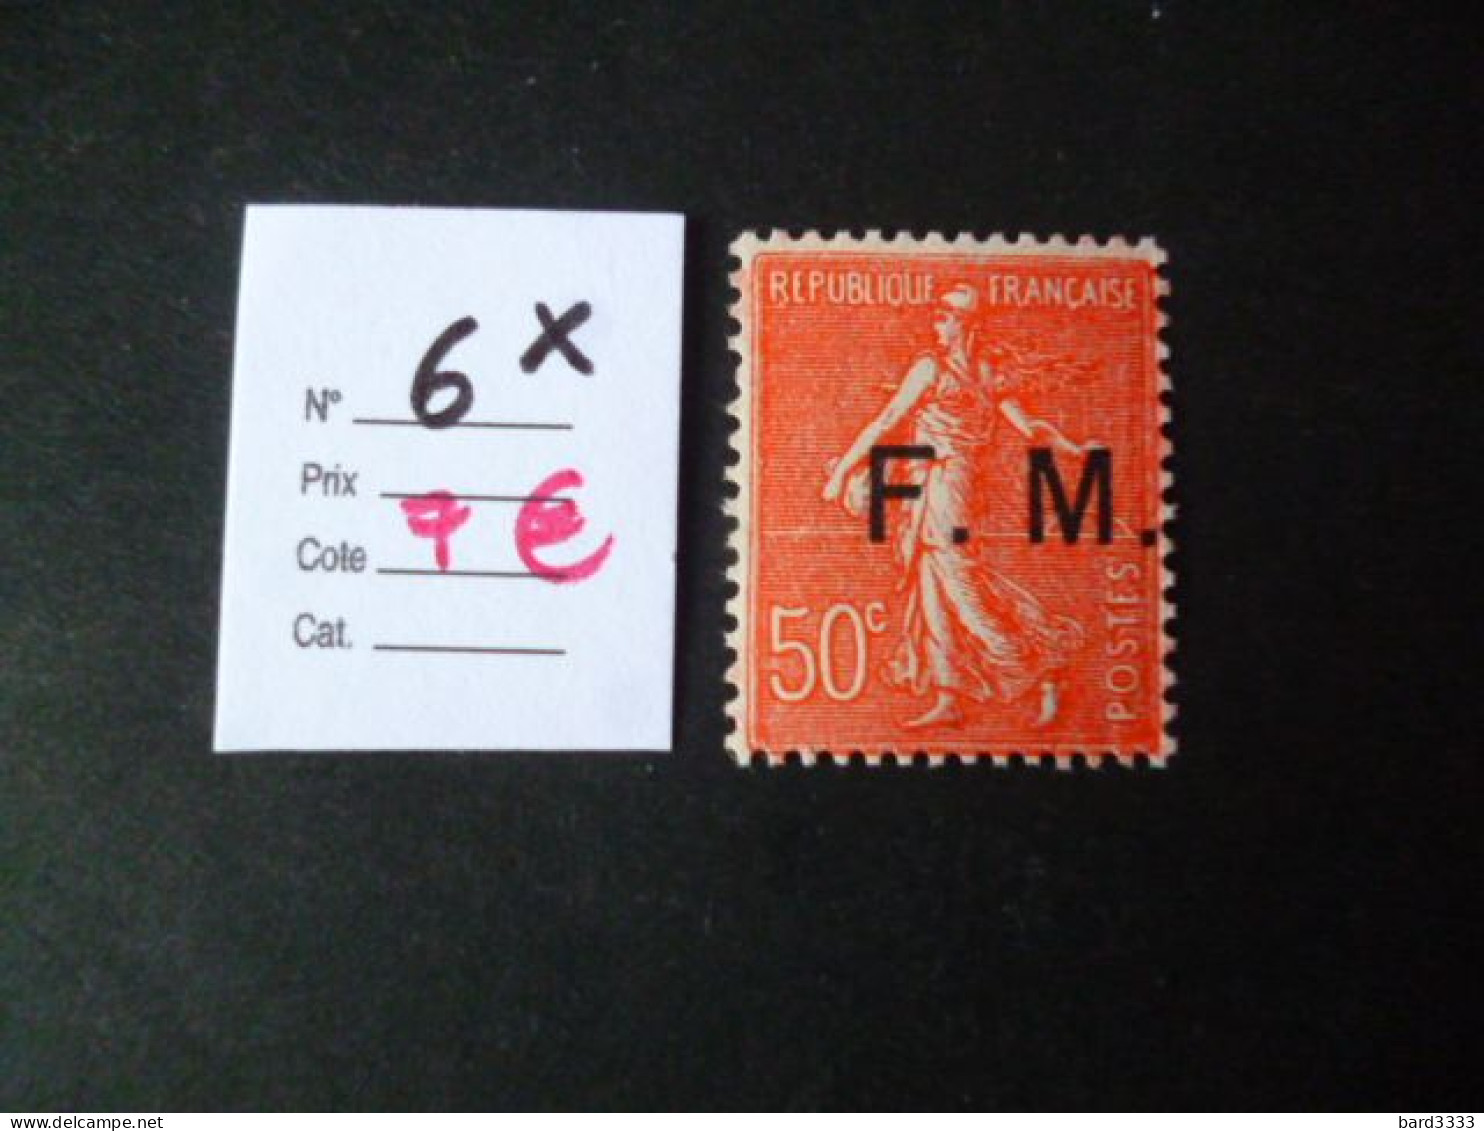 Timbre France Neuf * Franchise N° 6 Cote 7€ - Military Postage Stamps